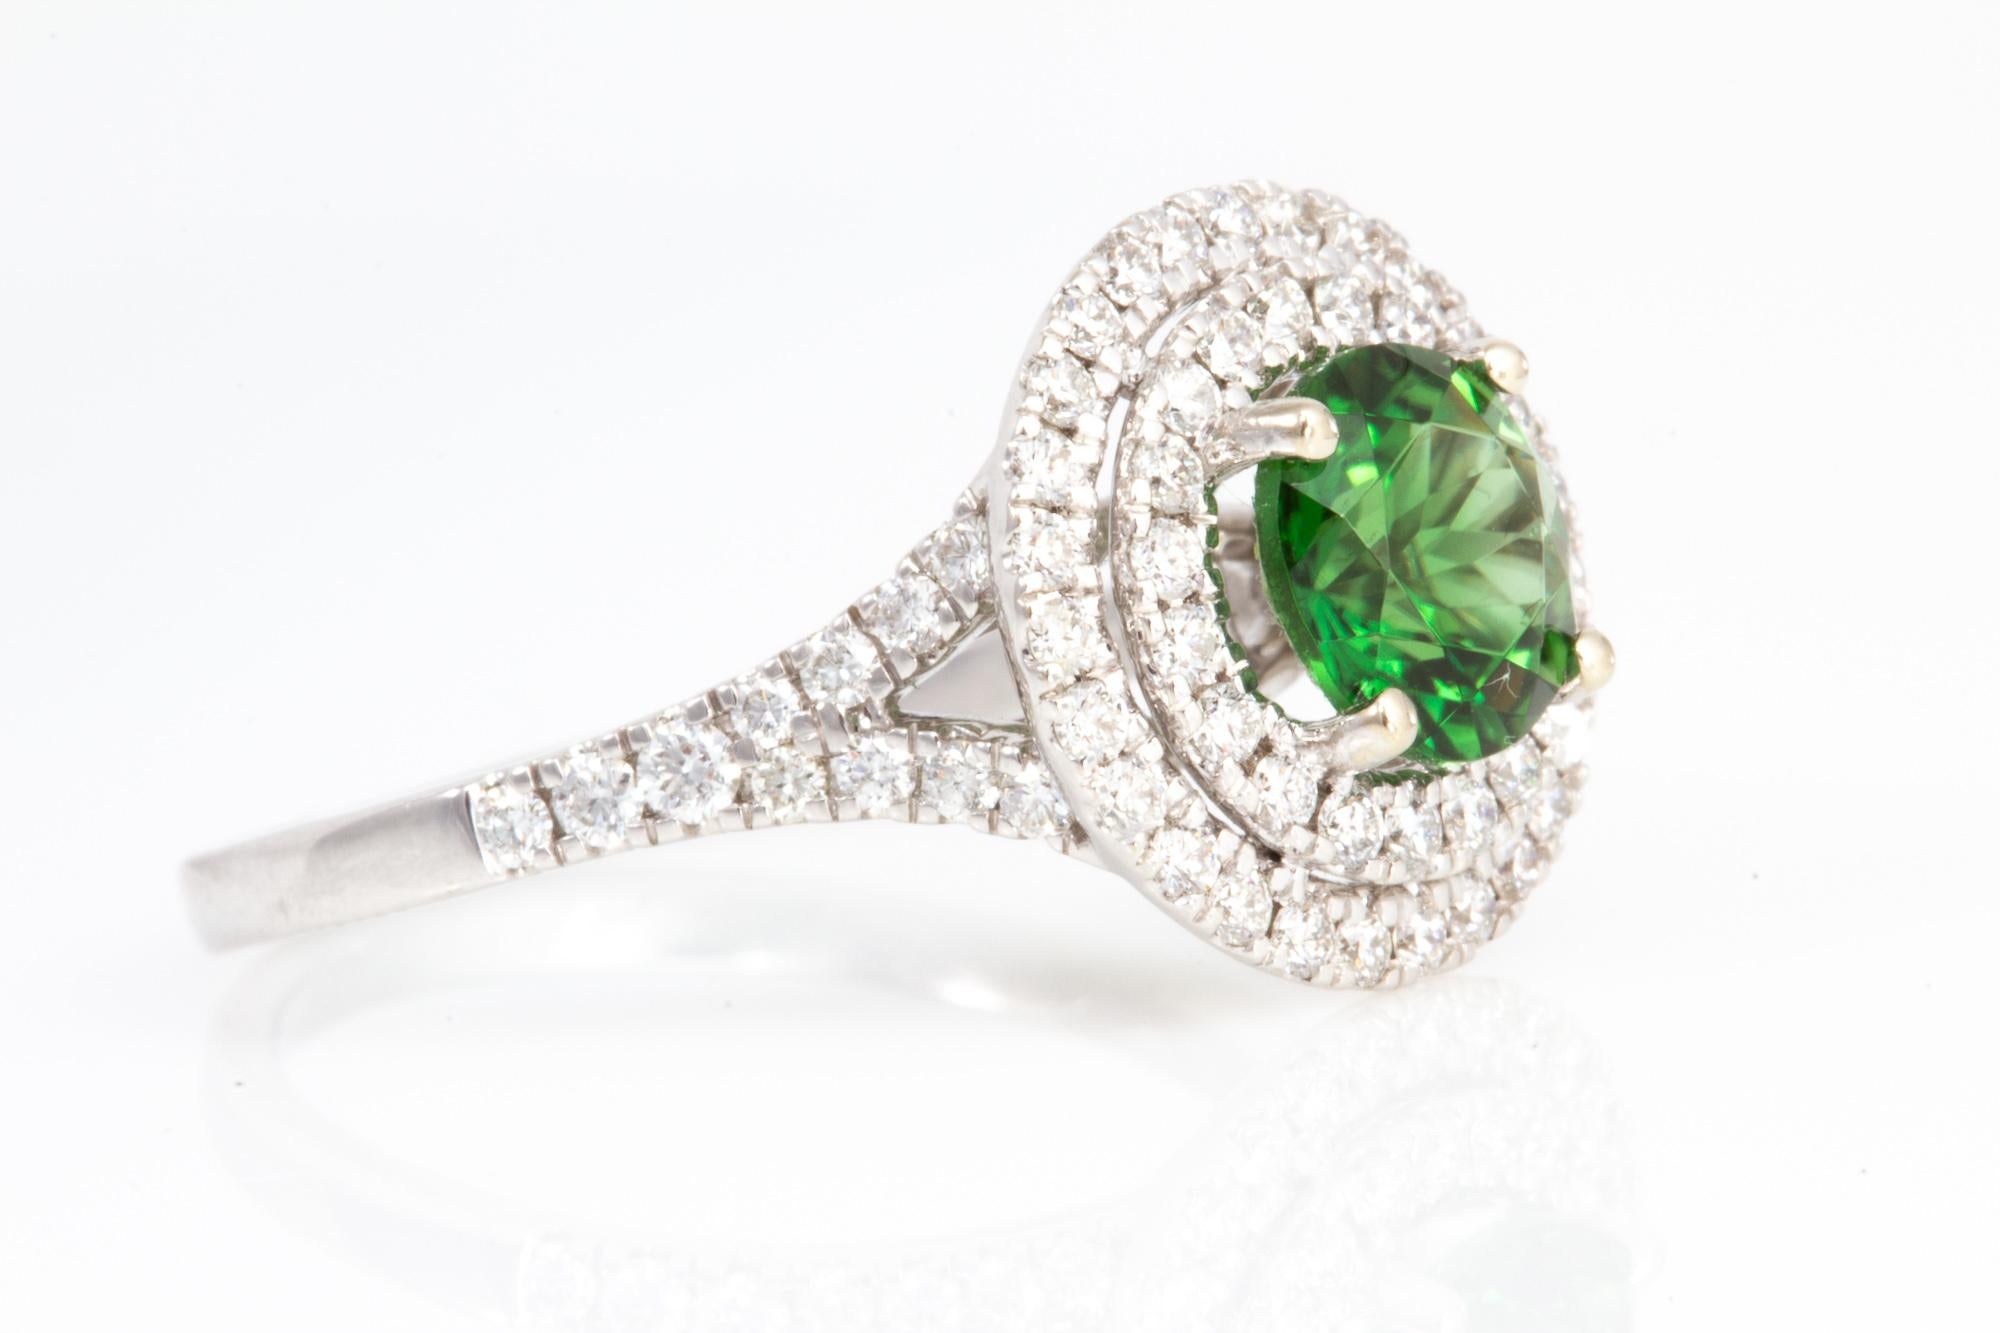 Exceptionally Well Cut 1.26 Carat Chrome Tourmaline and Diamond Ring For Sale 7